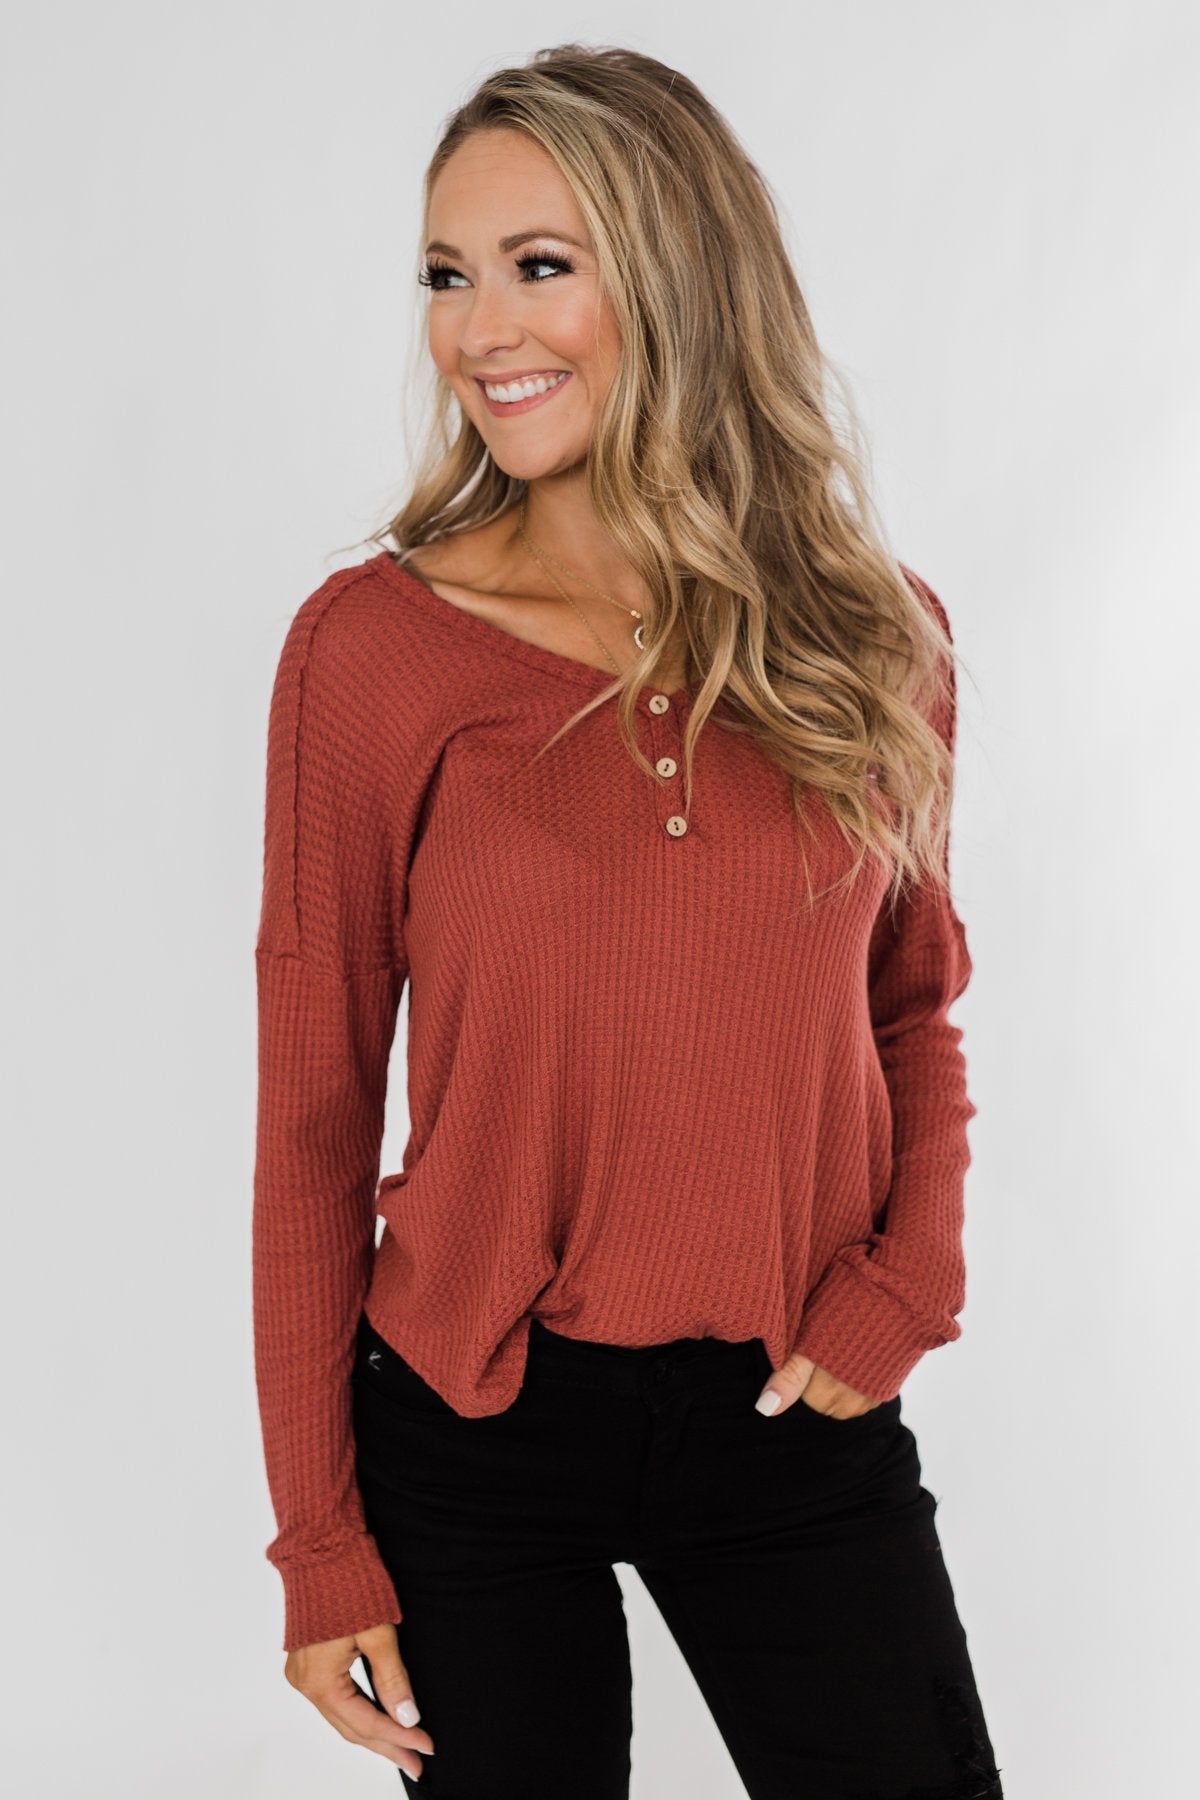 Knowing You V-Neck Thermal Top- Brick